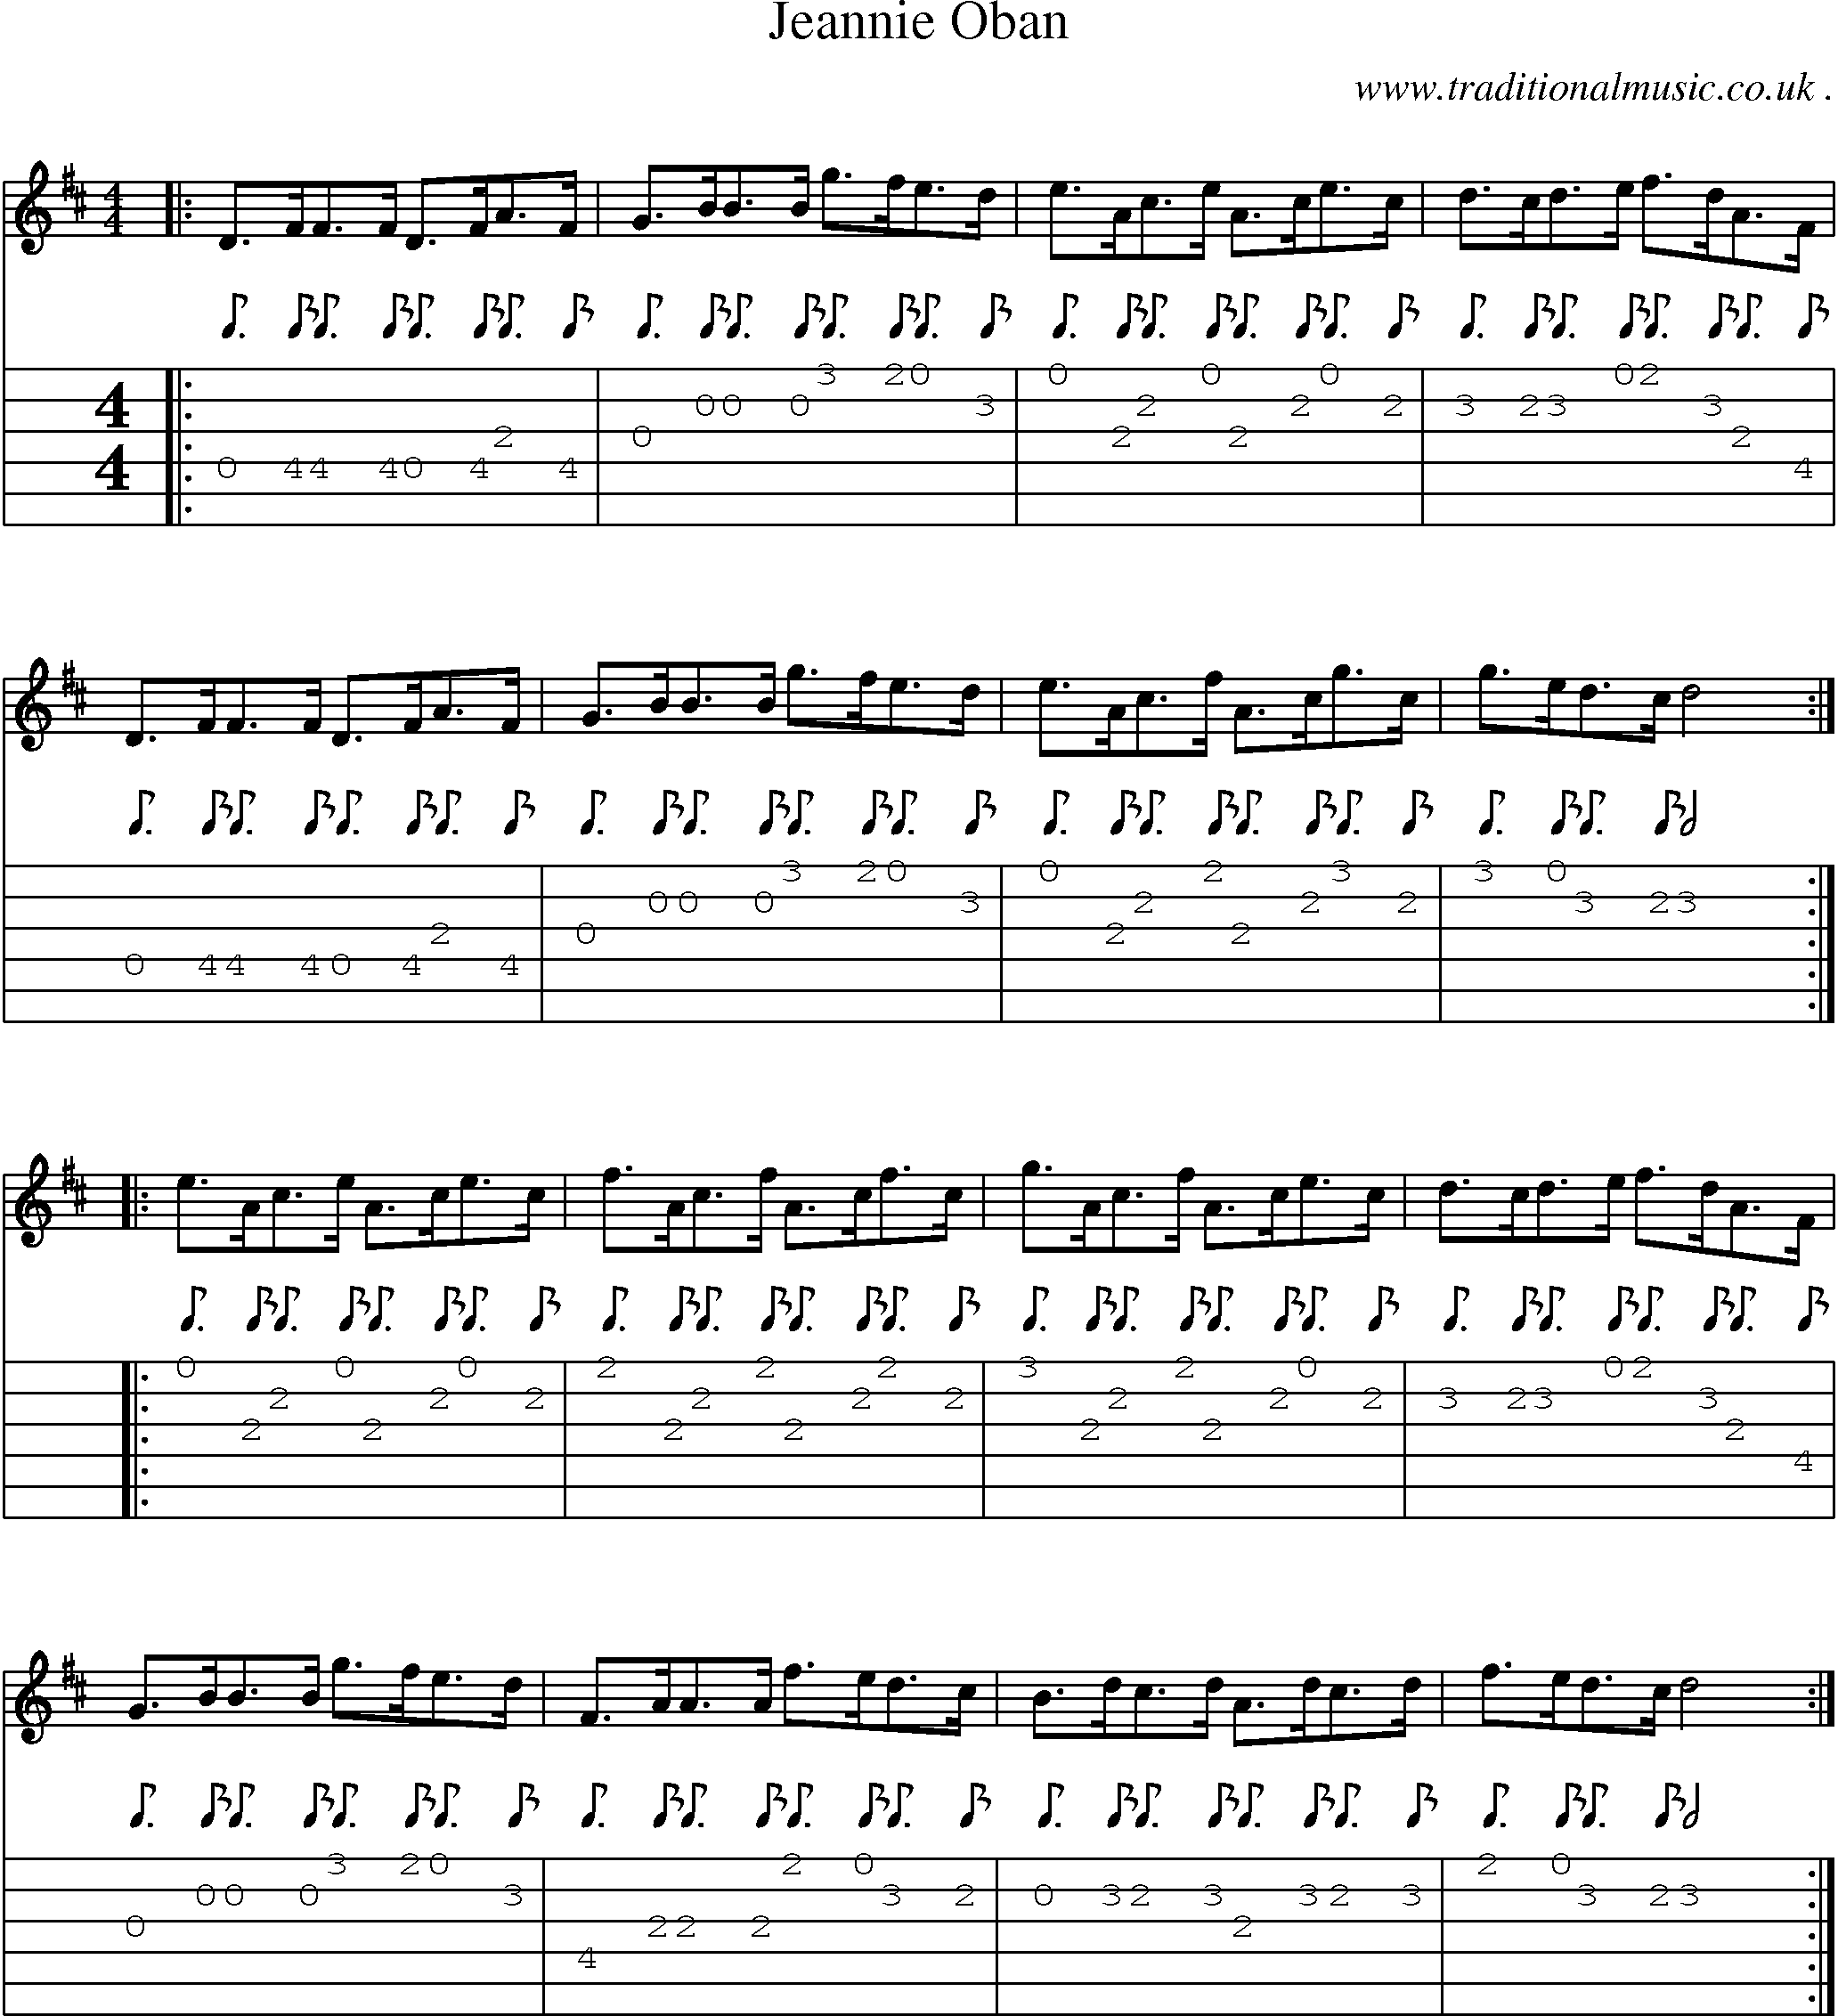 Sheet-Music and Guitar Tabs for Jeannie Oban